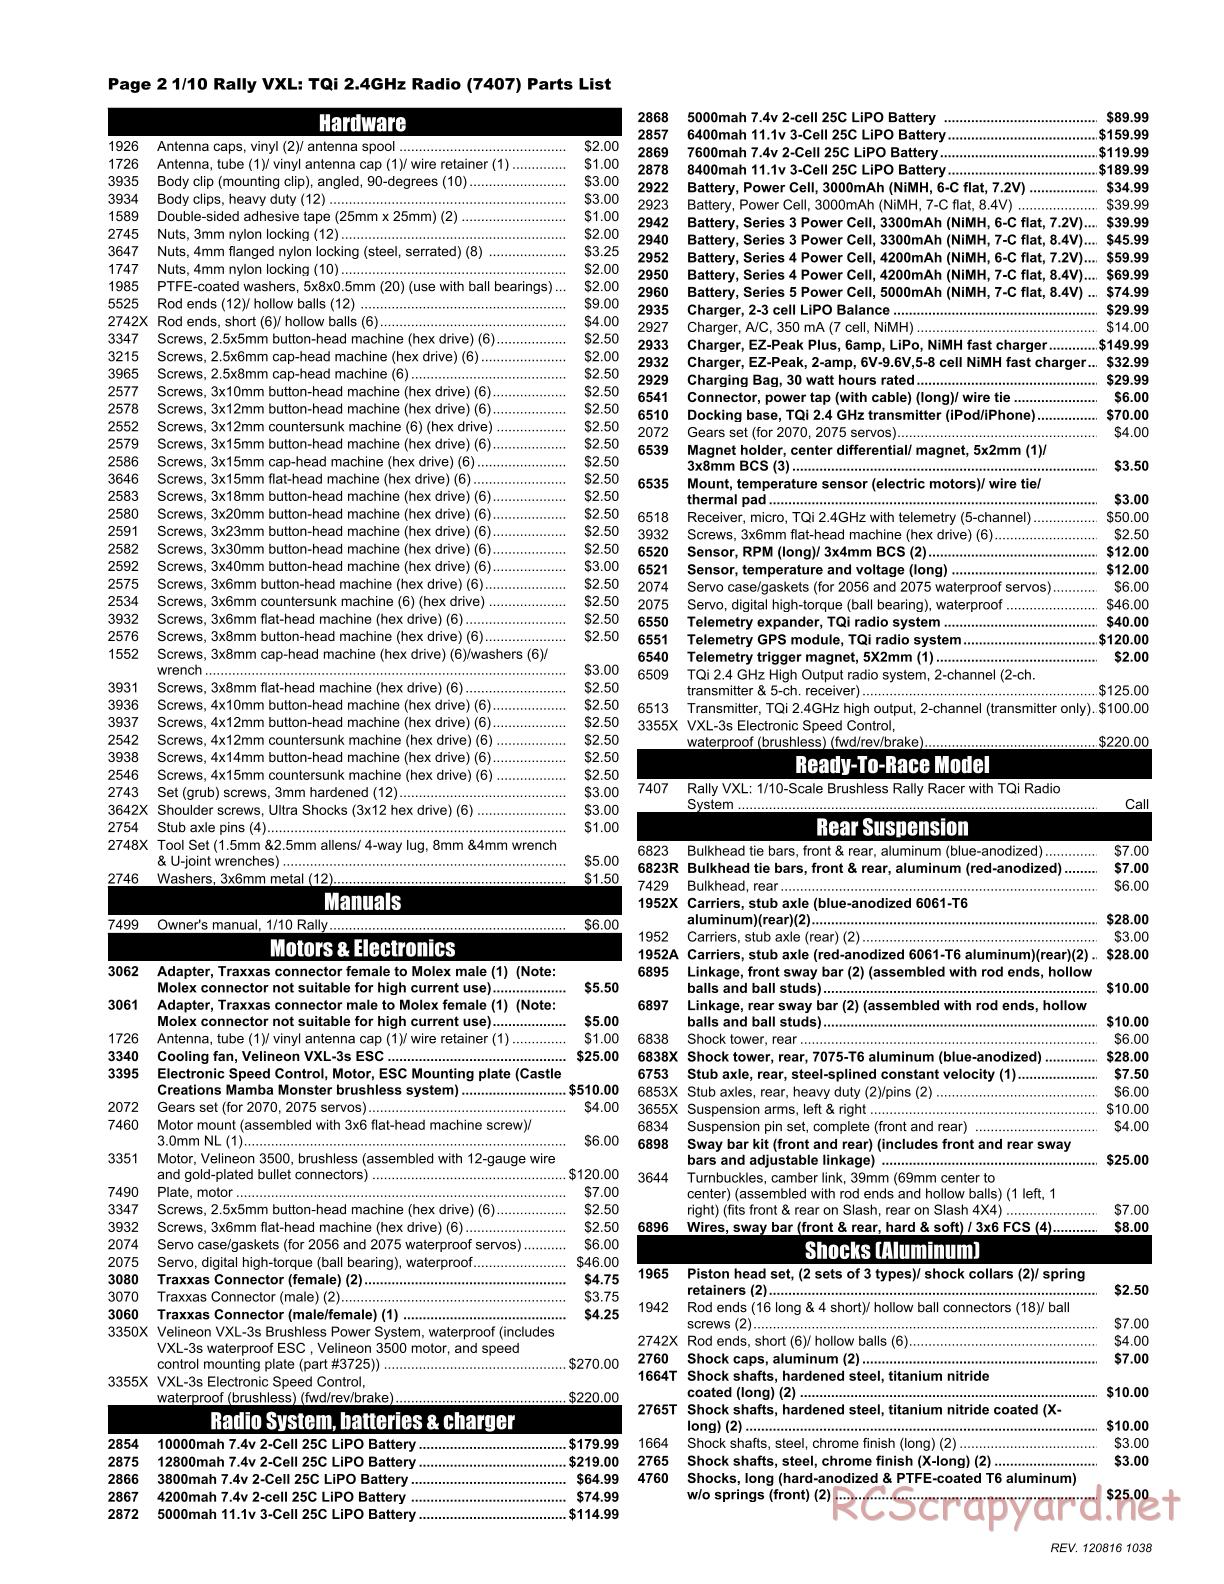 Traxxas - Rally (2012) - Parts List - Page 2